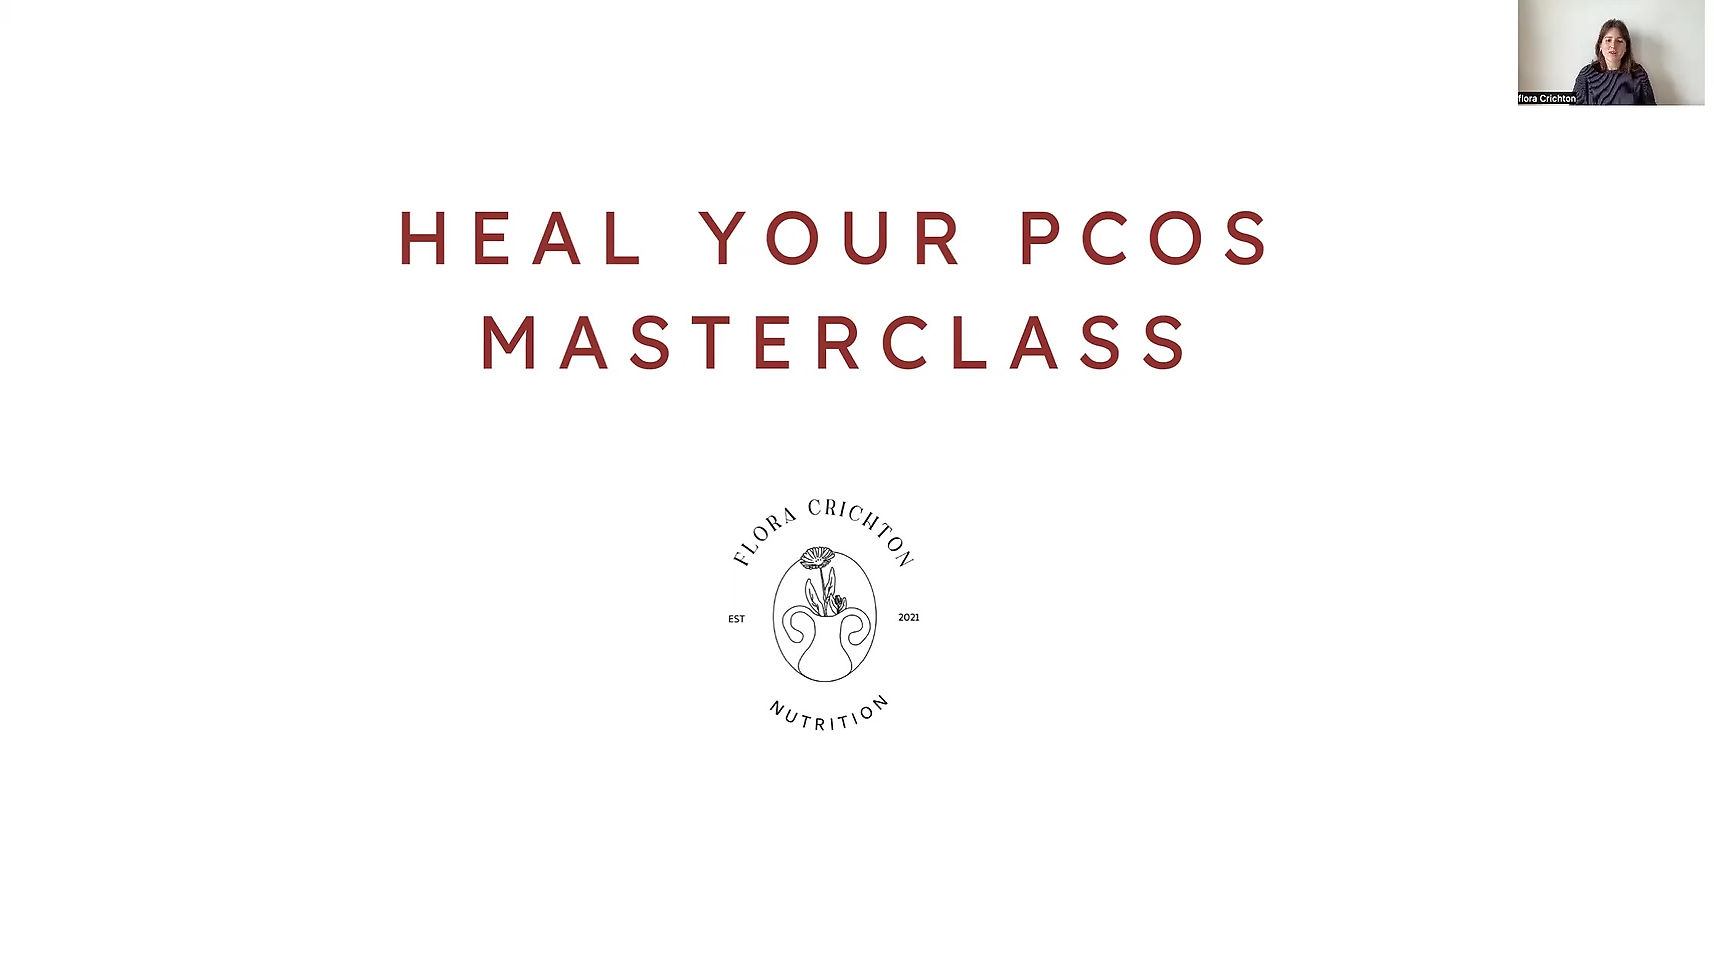 Heal Your PCOS Masterclass 1